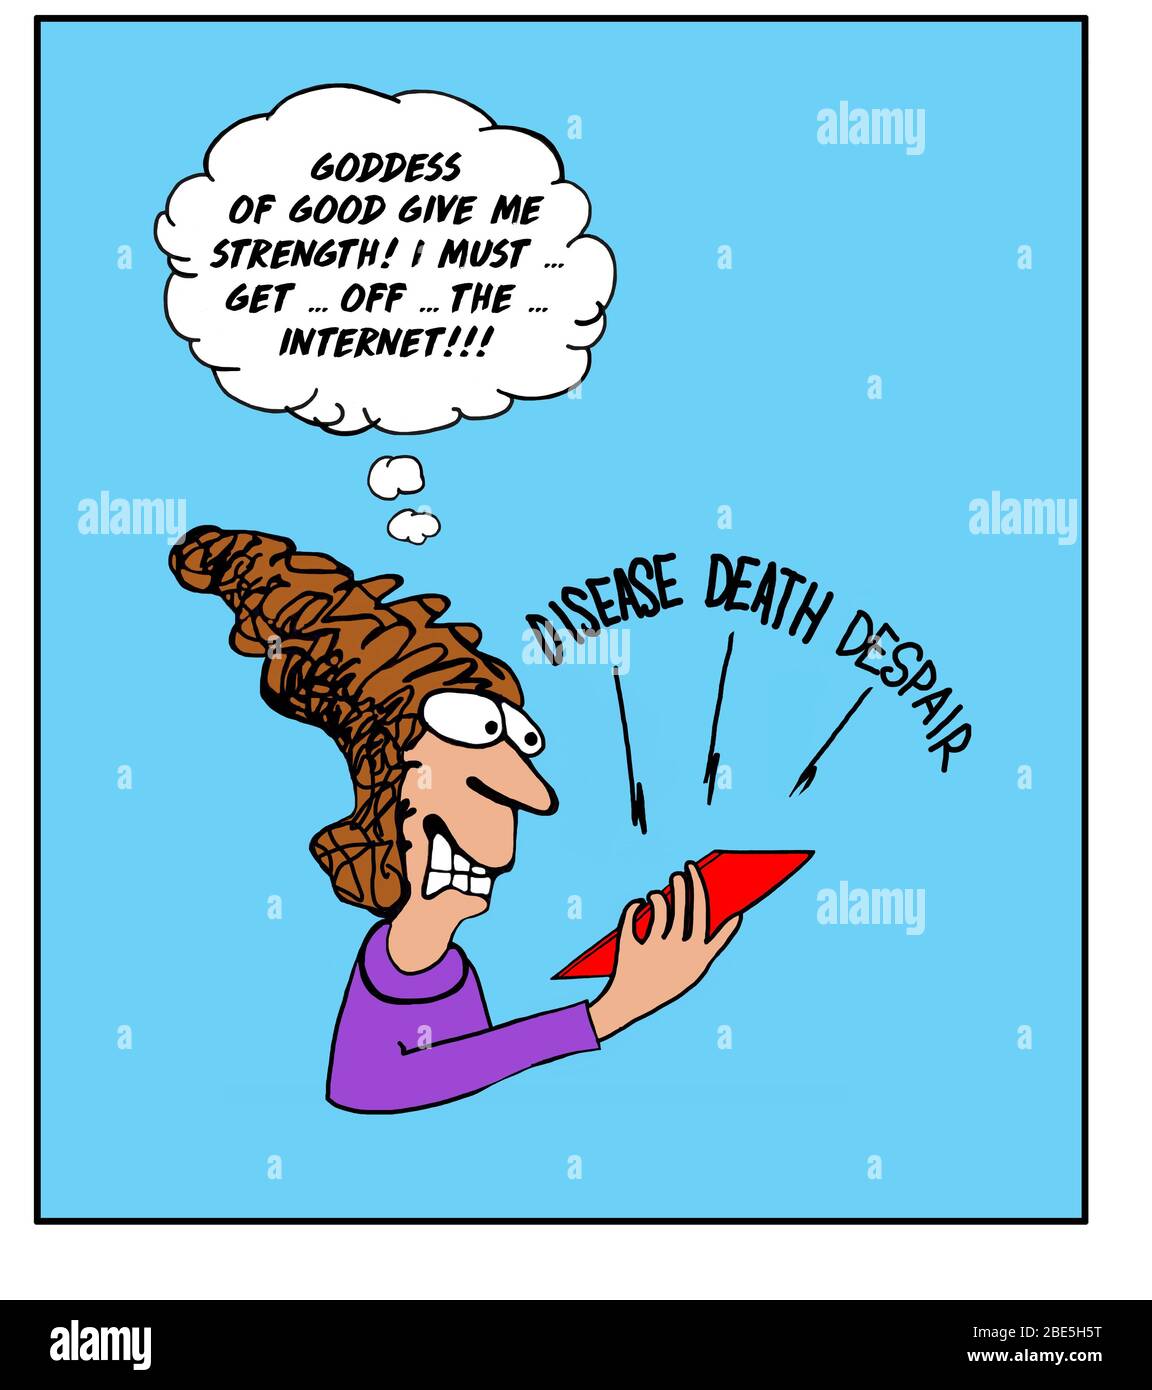 Color cartoon showing an overwhelmed woman getting bad news from the internet and stating she must get off the internet. Stock Photo